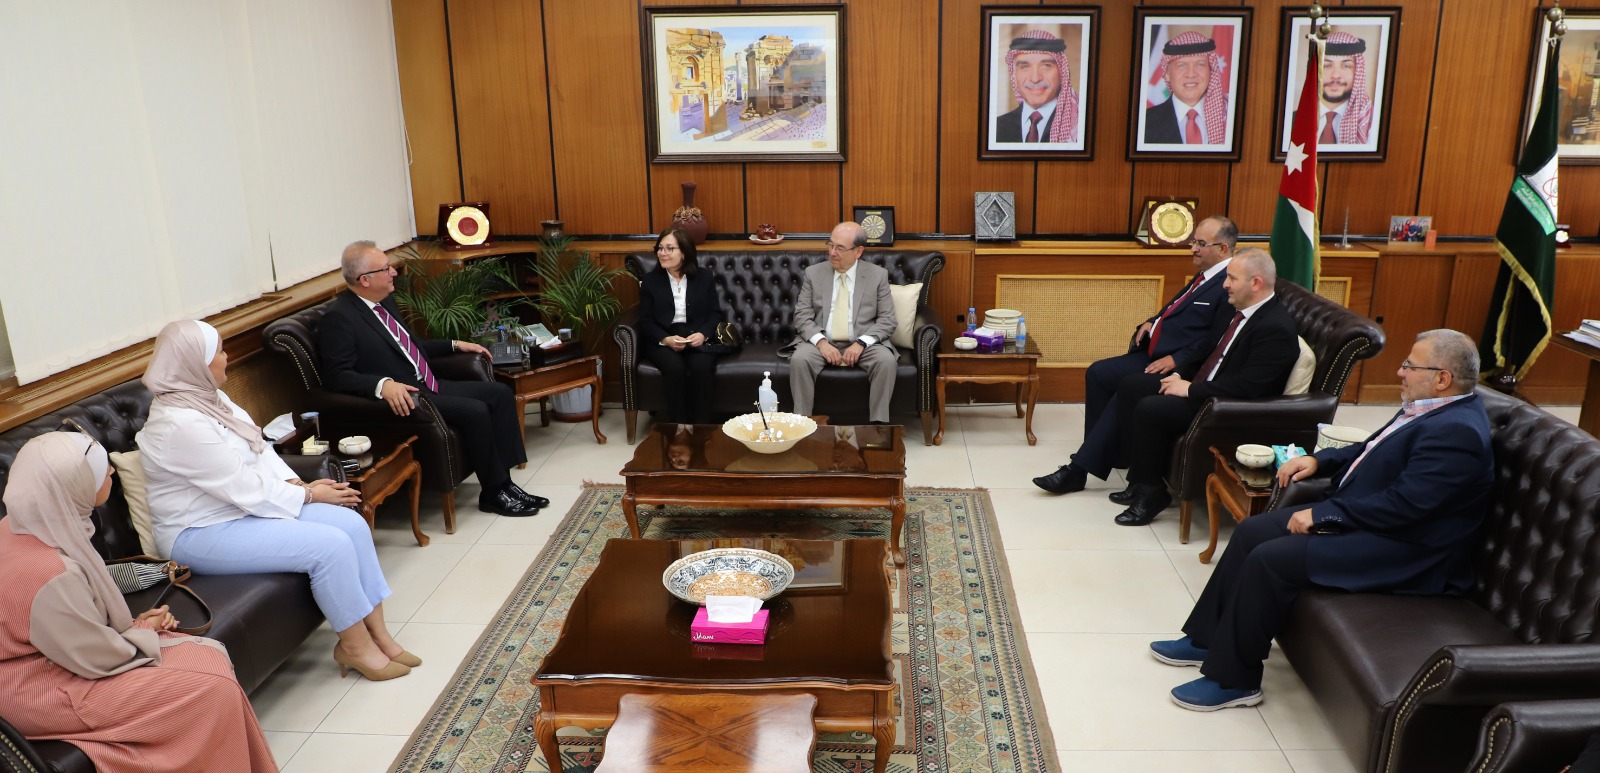 President of the world Federation for Medical Education (WFME) visits ...